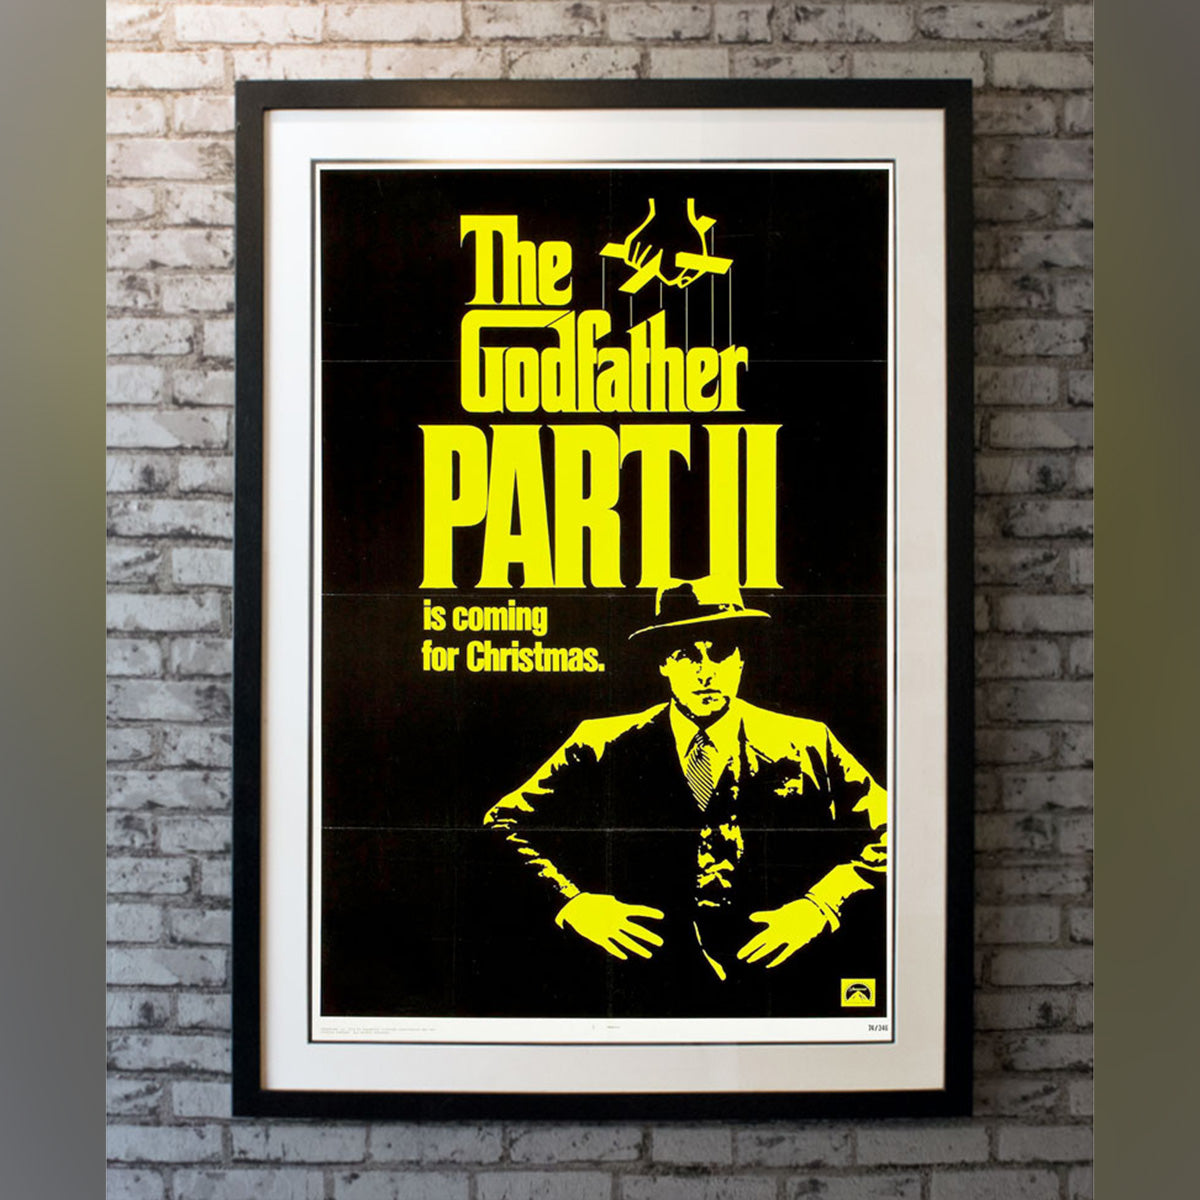 Original Movie Poster of Godfather Part II, The (1974)